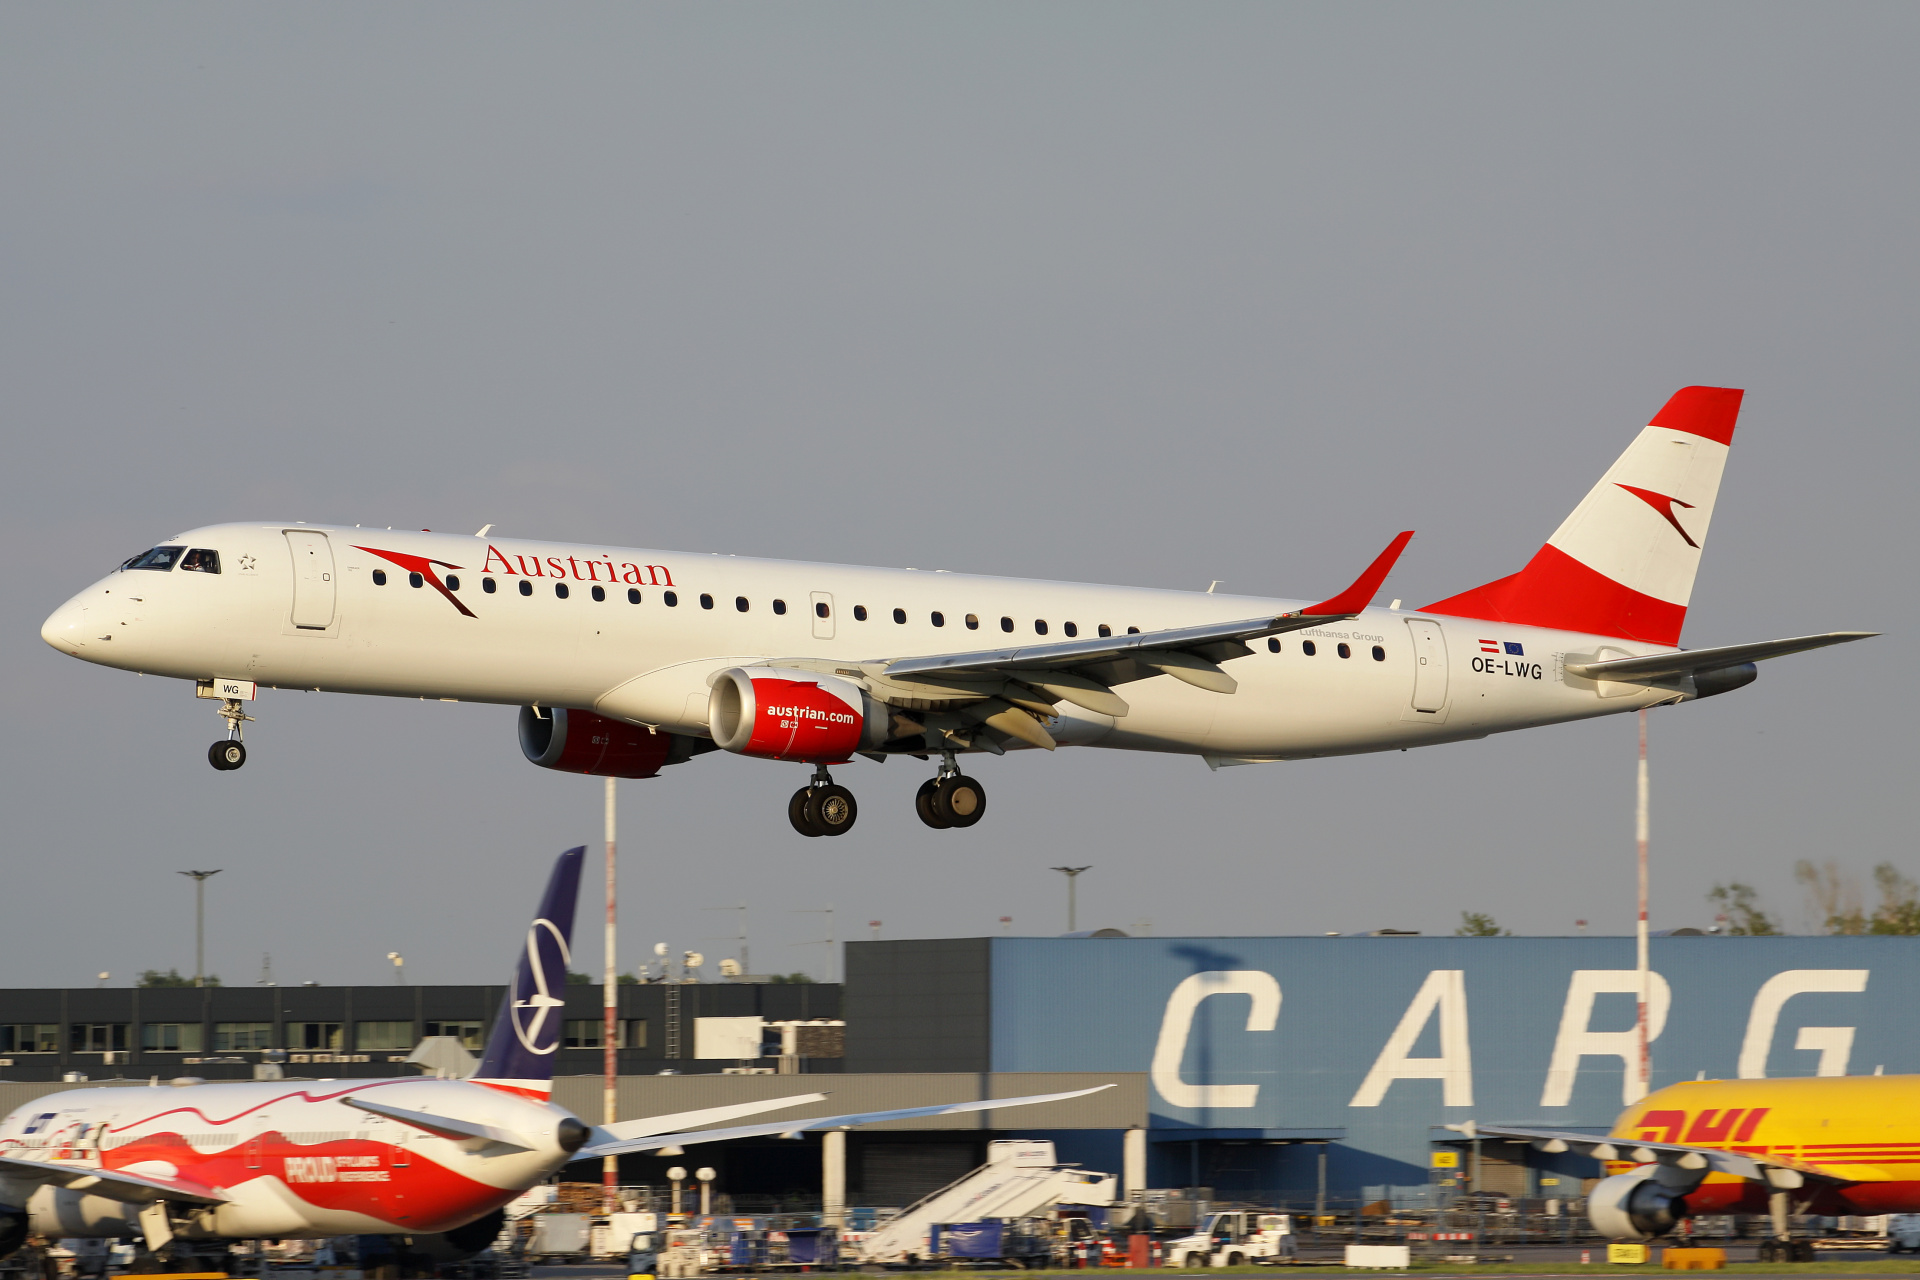 OE-LWG (Aircraft » EPWA Spotting » Embraer E195 » Austrian Airlines)